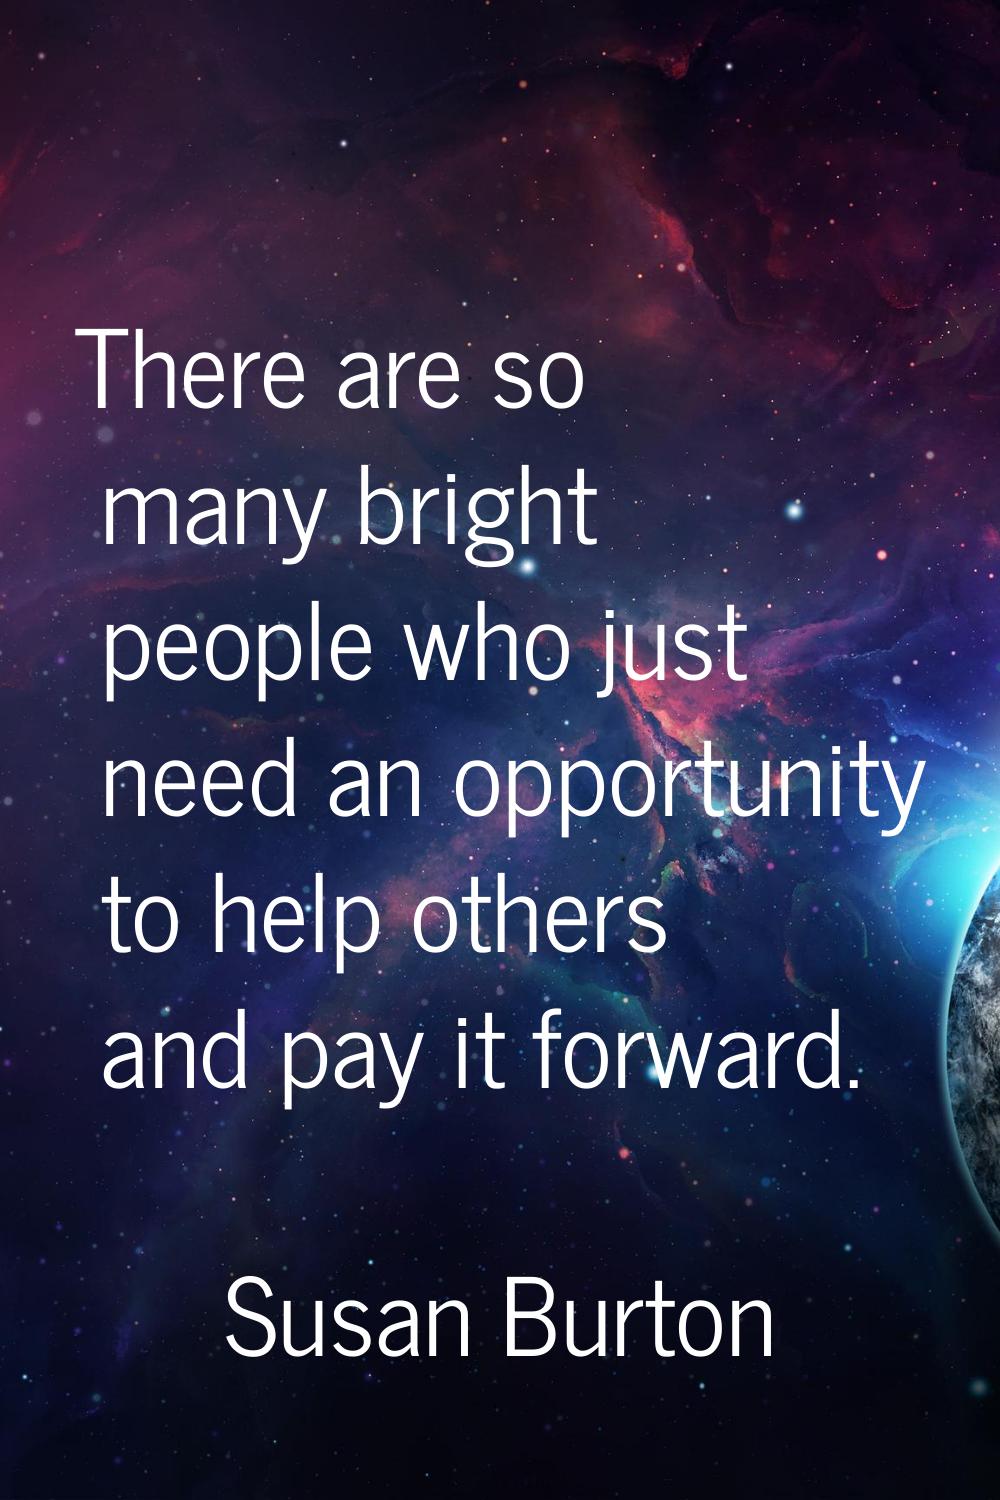 There are so many bright people who just need an opportunity to help others and pay it forward.